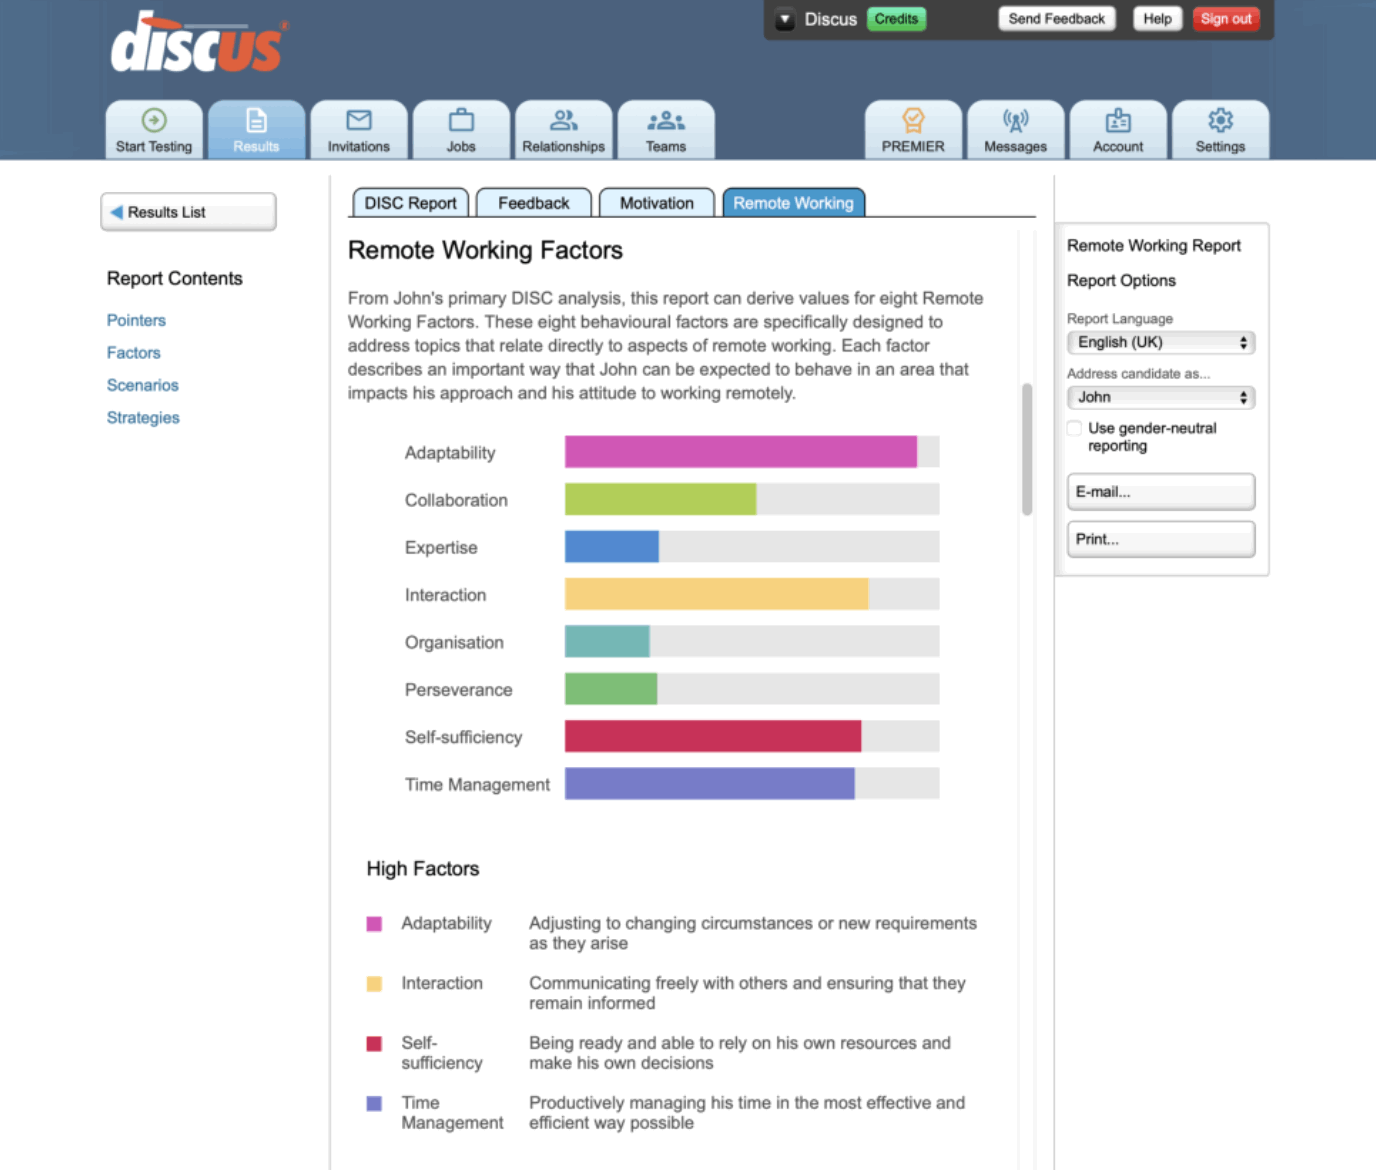 Screenshot showing a Discus Remote Working report viewed through a Web browser